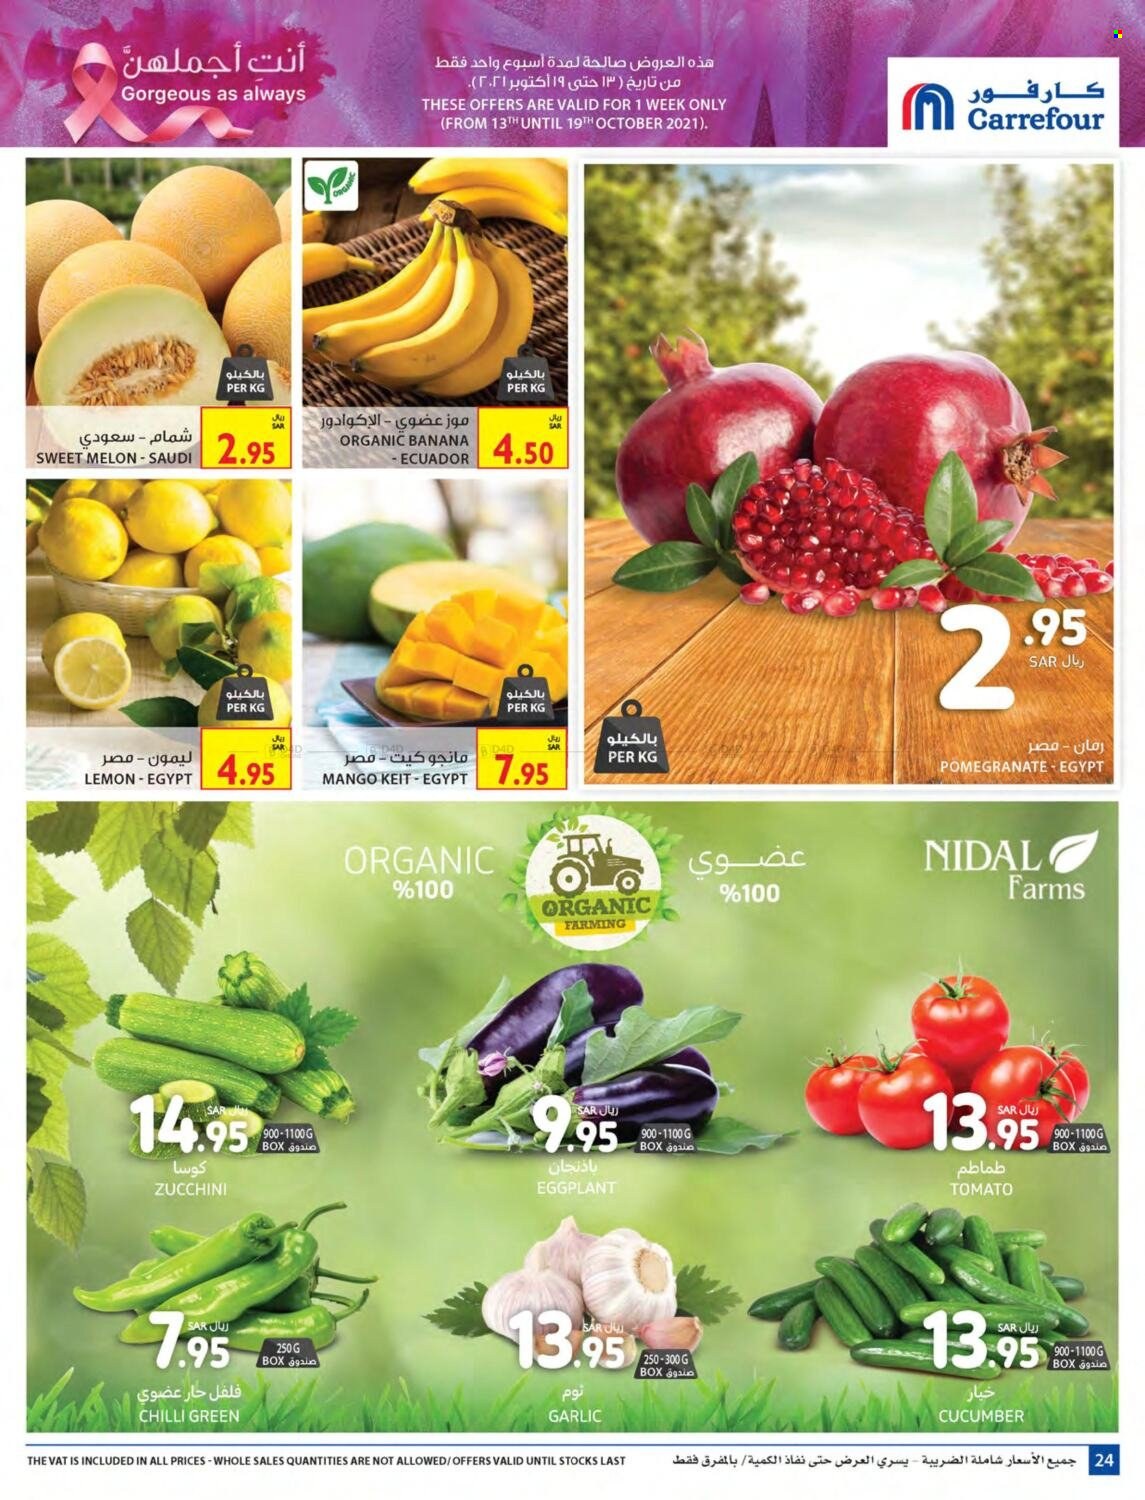 Carrefour flyer  - 10.13.2021 - 10.26.2021. Page 24.